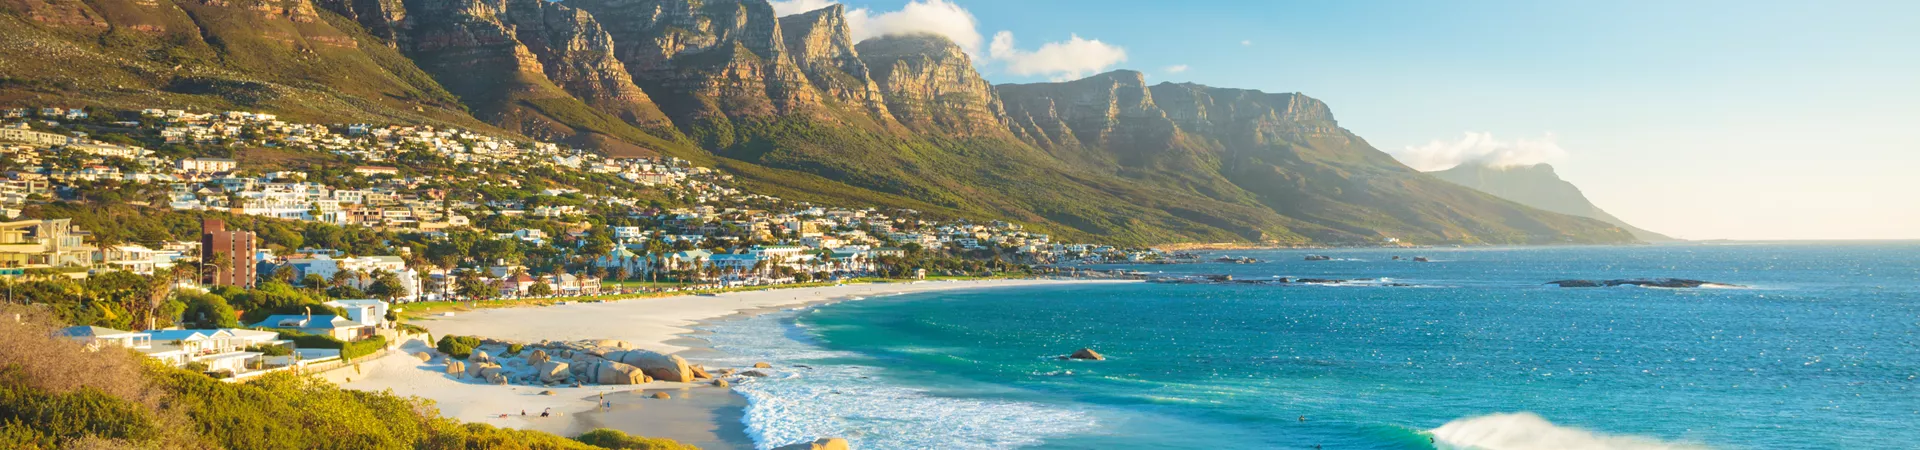 Twelve Apostles Mountain In Camps Bay, Cape Town, South Africa 477451698